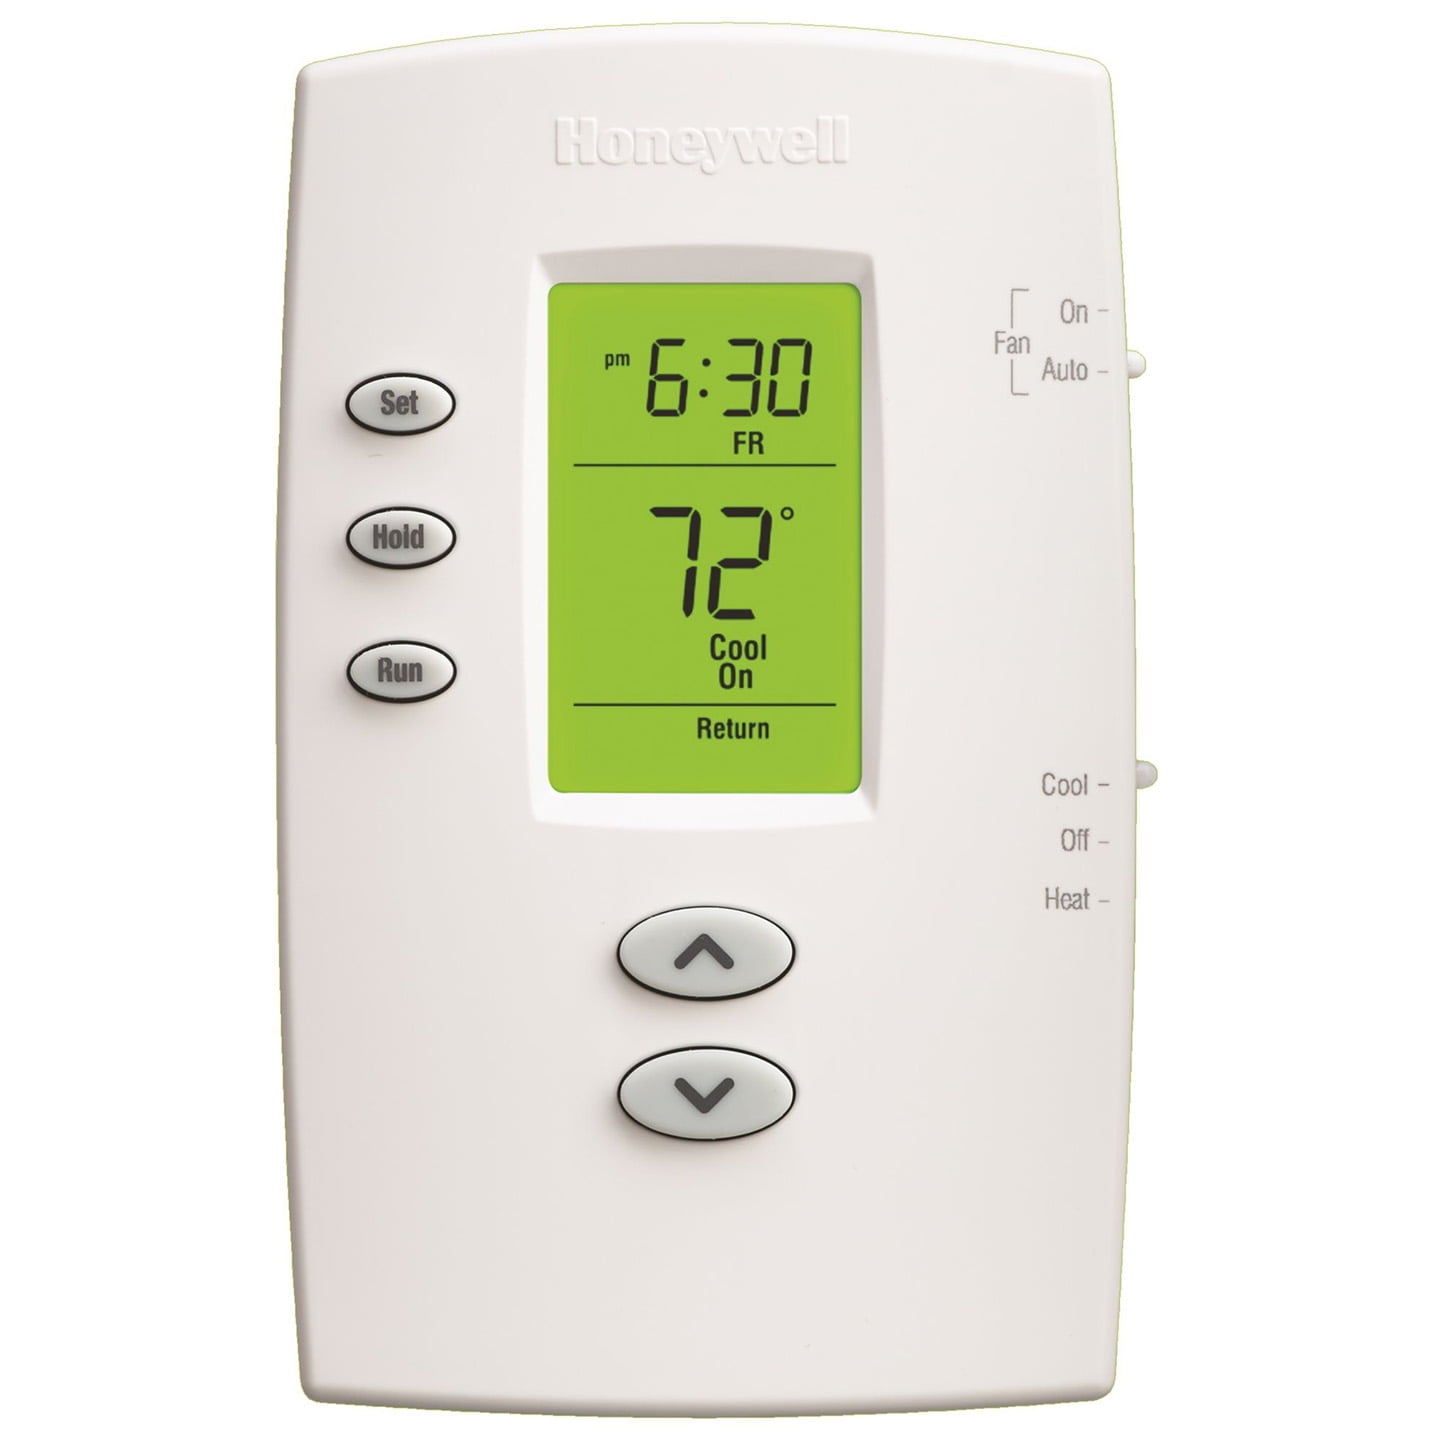 Buy Honeywell TH2110DV1008 PRO 2000 Vertical Programmable Thermostat 